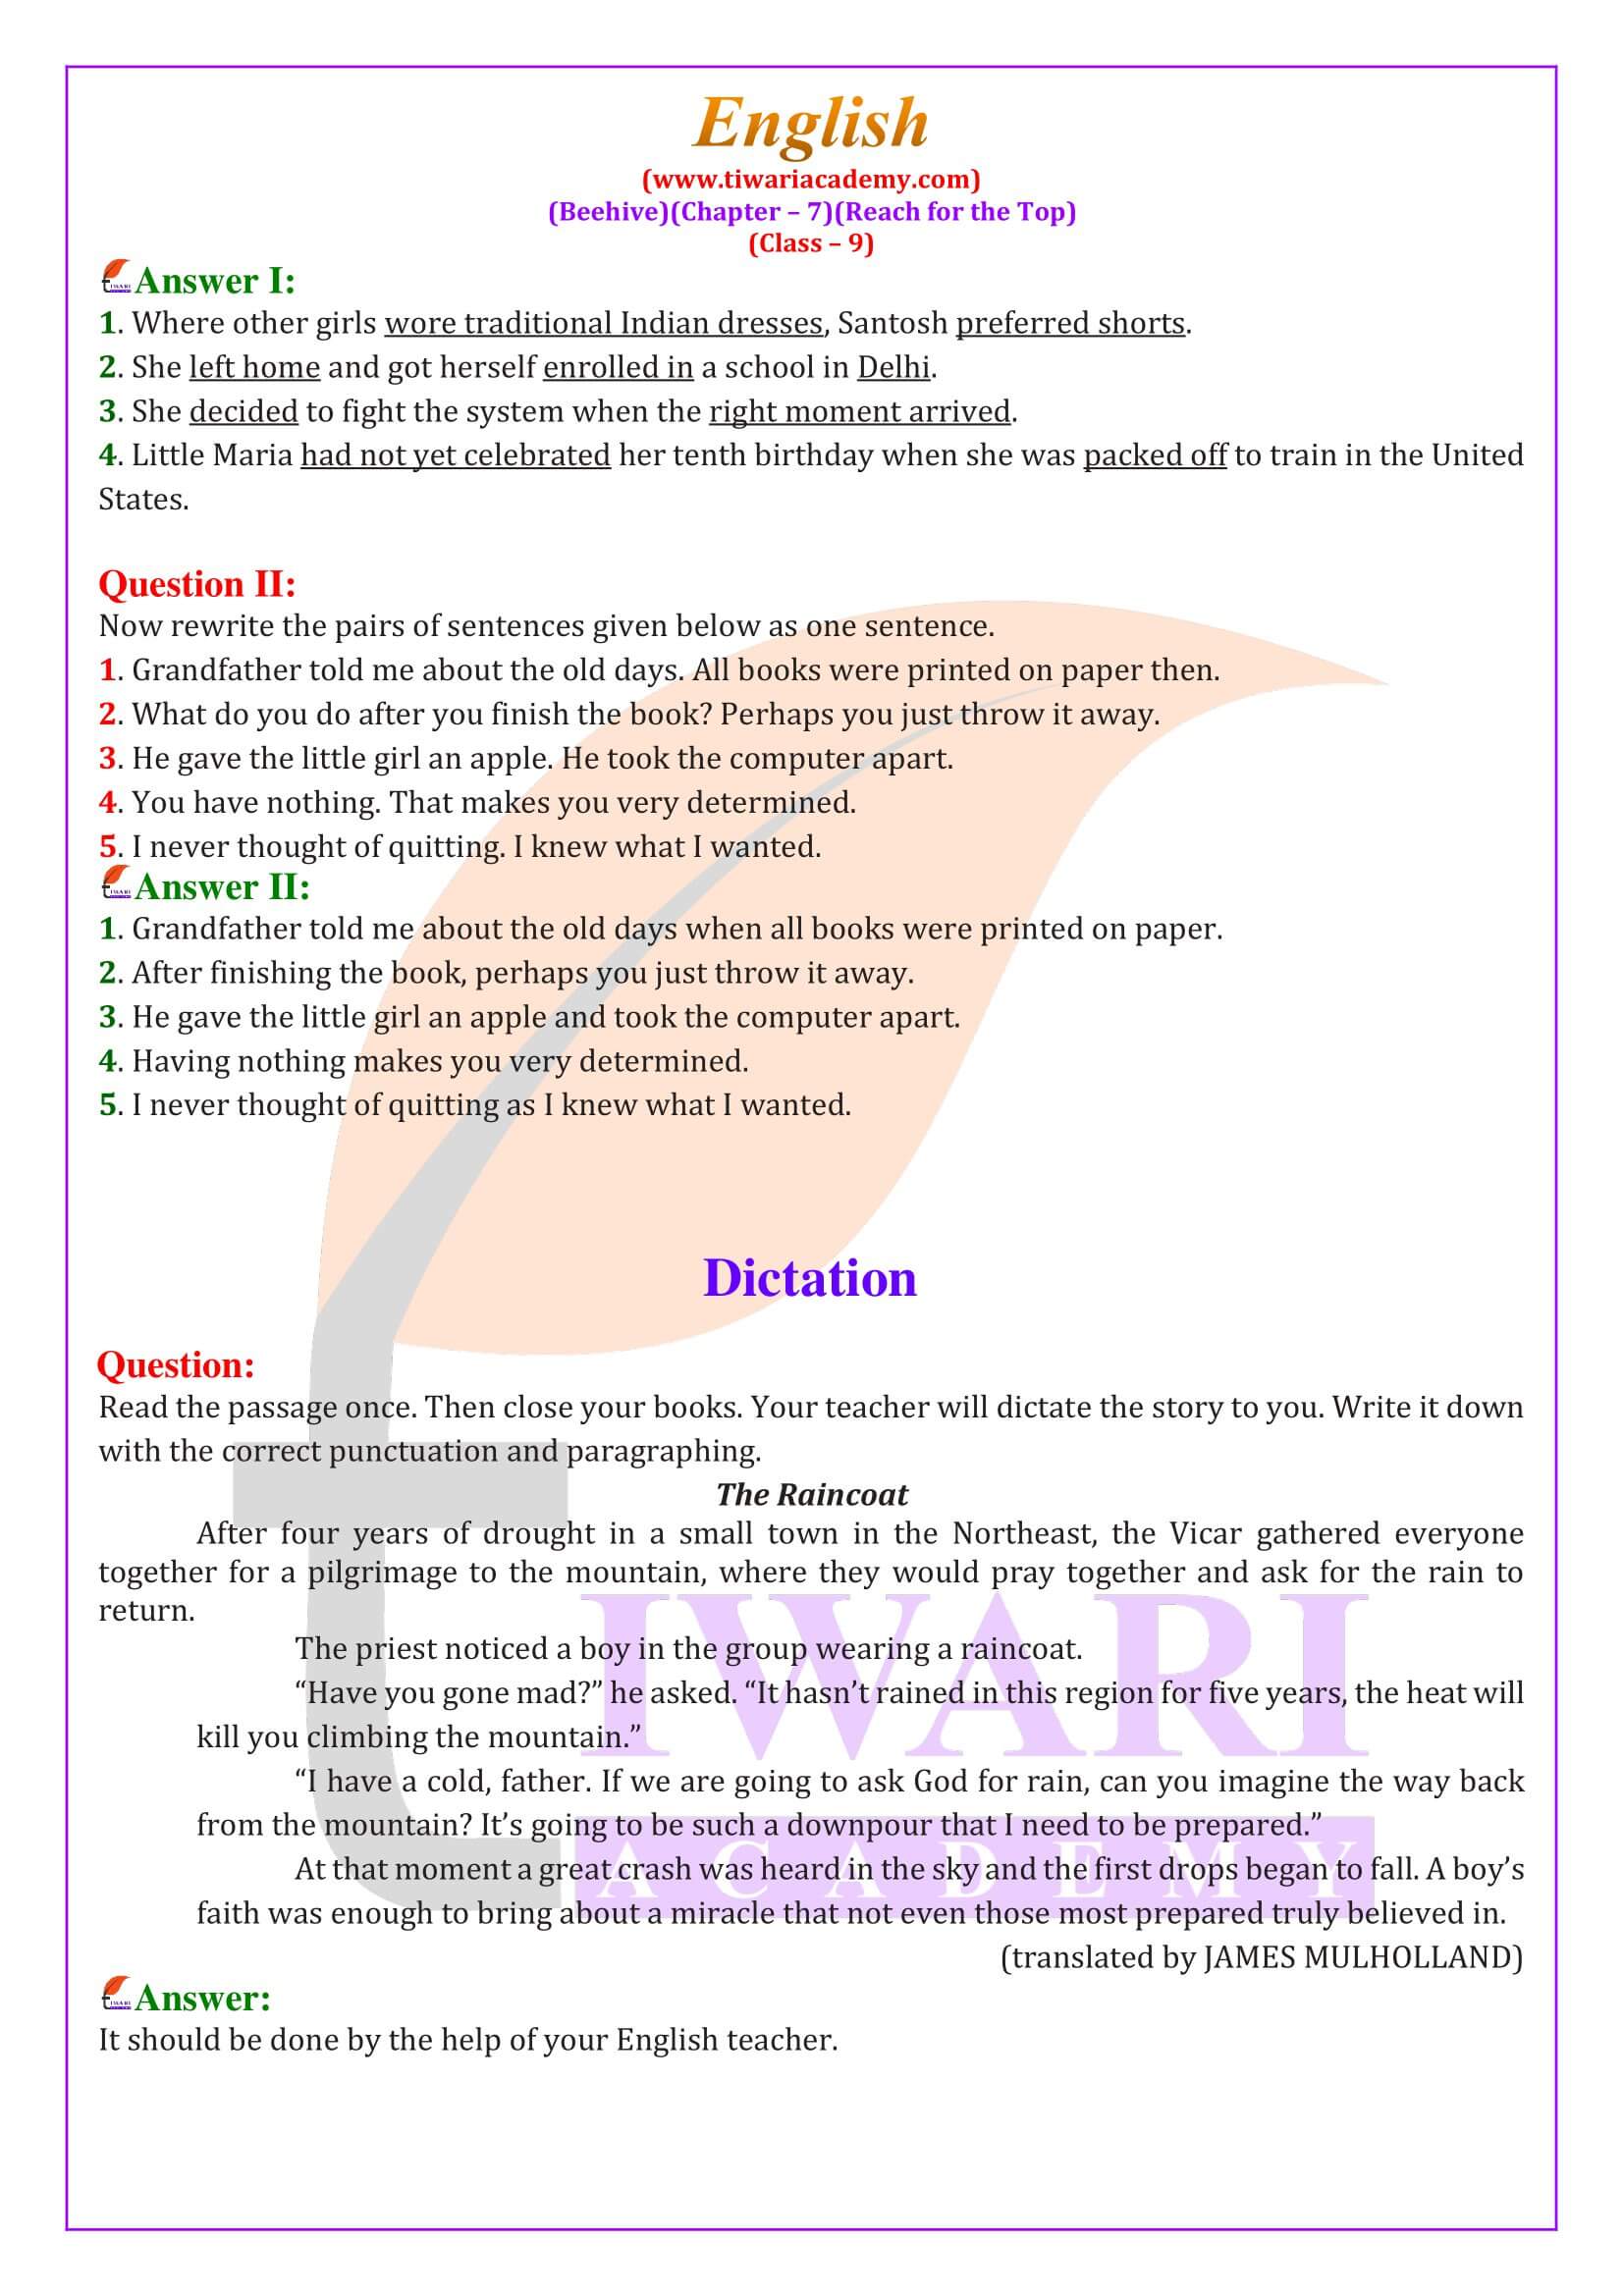 Class 9 English Beehive Chapter 7 Question Answers